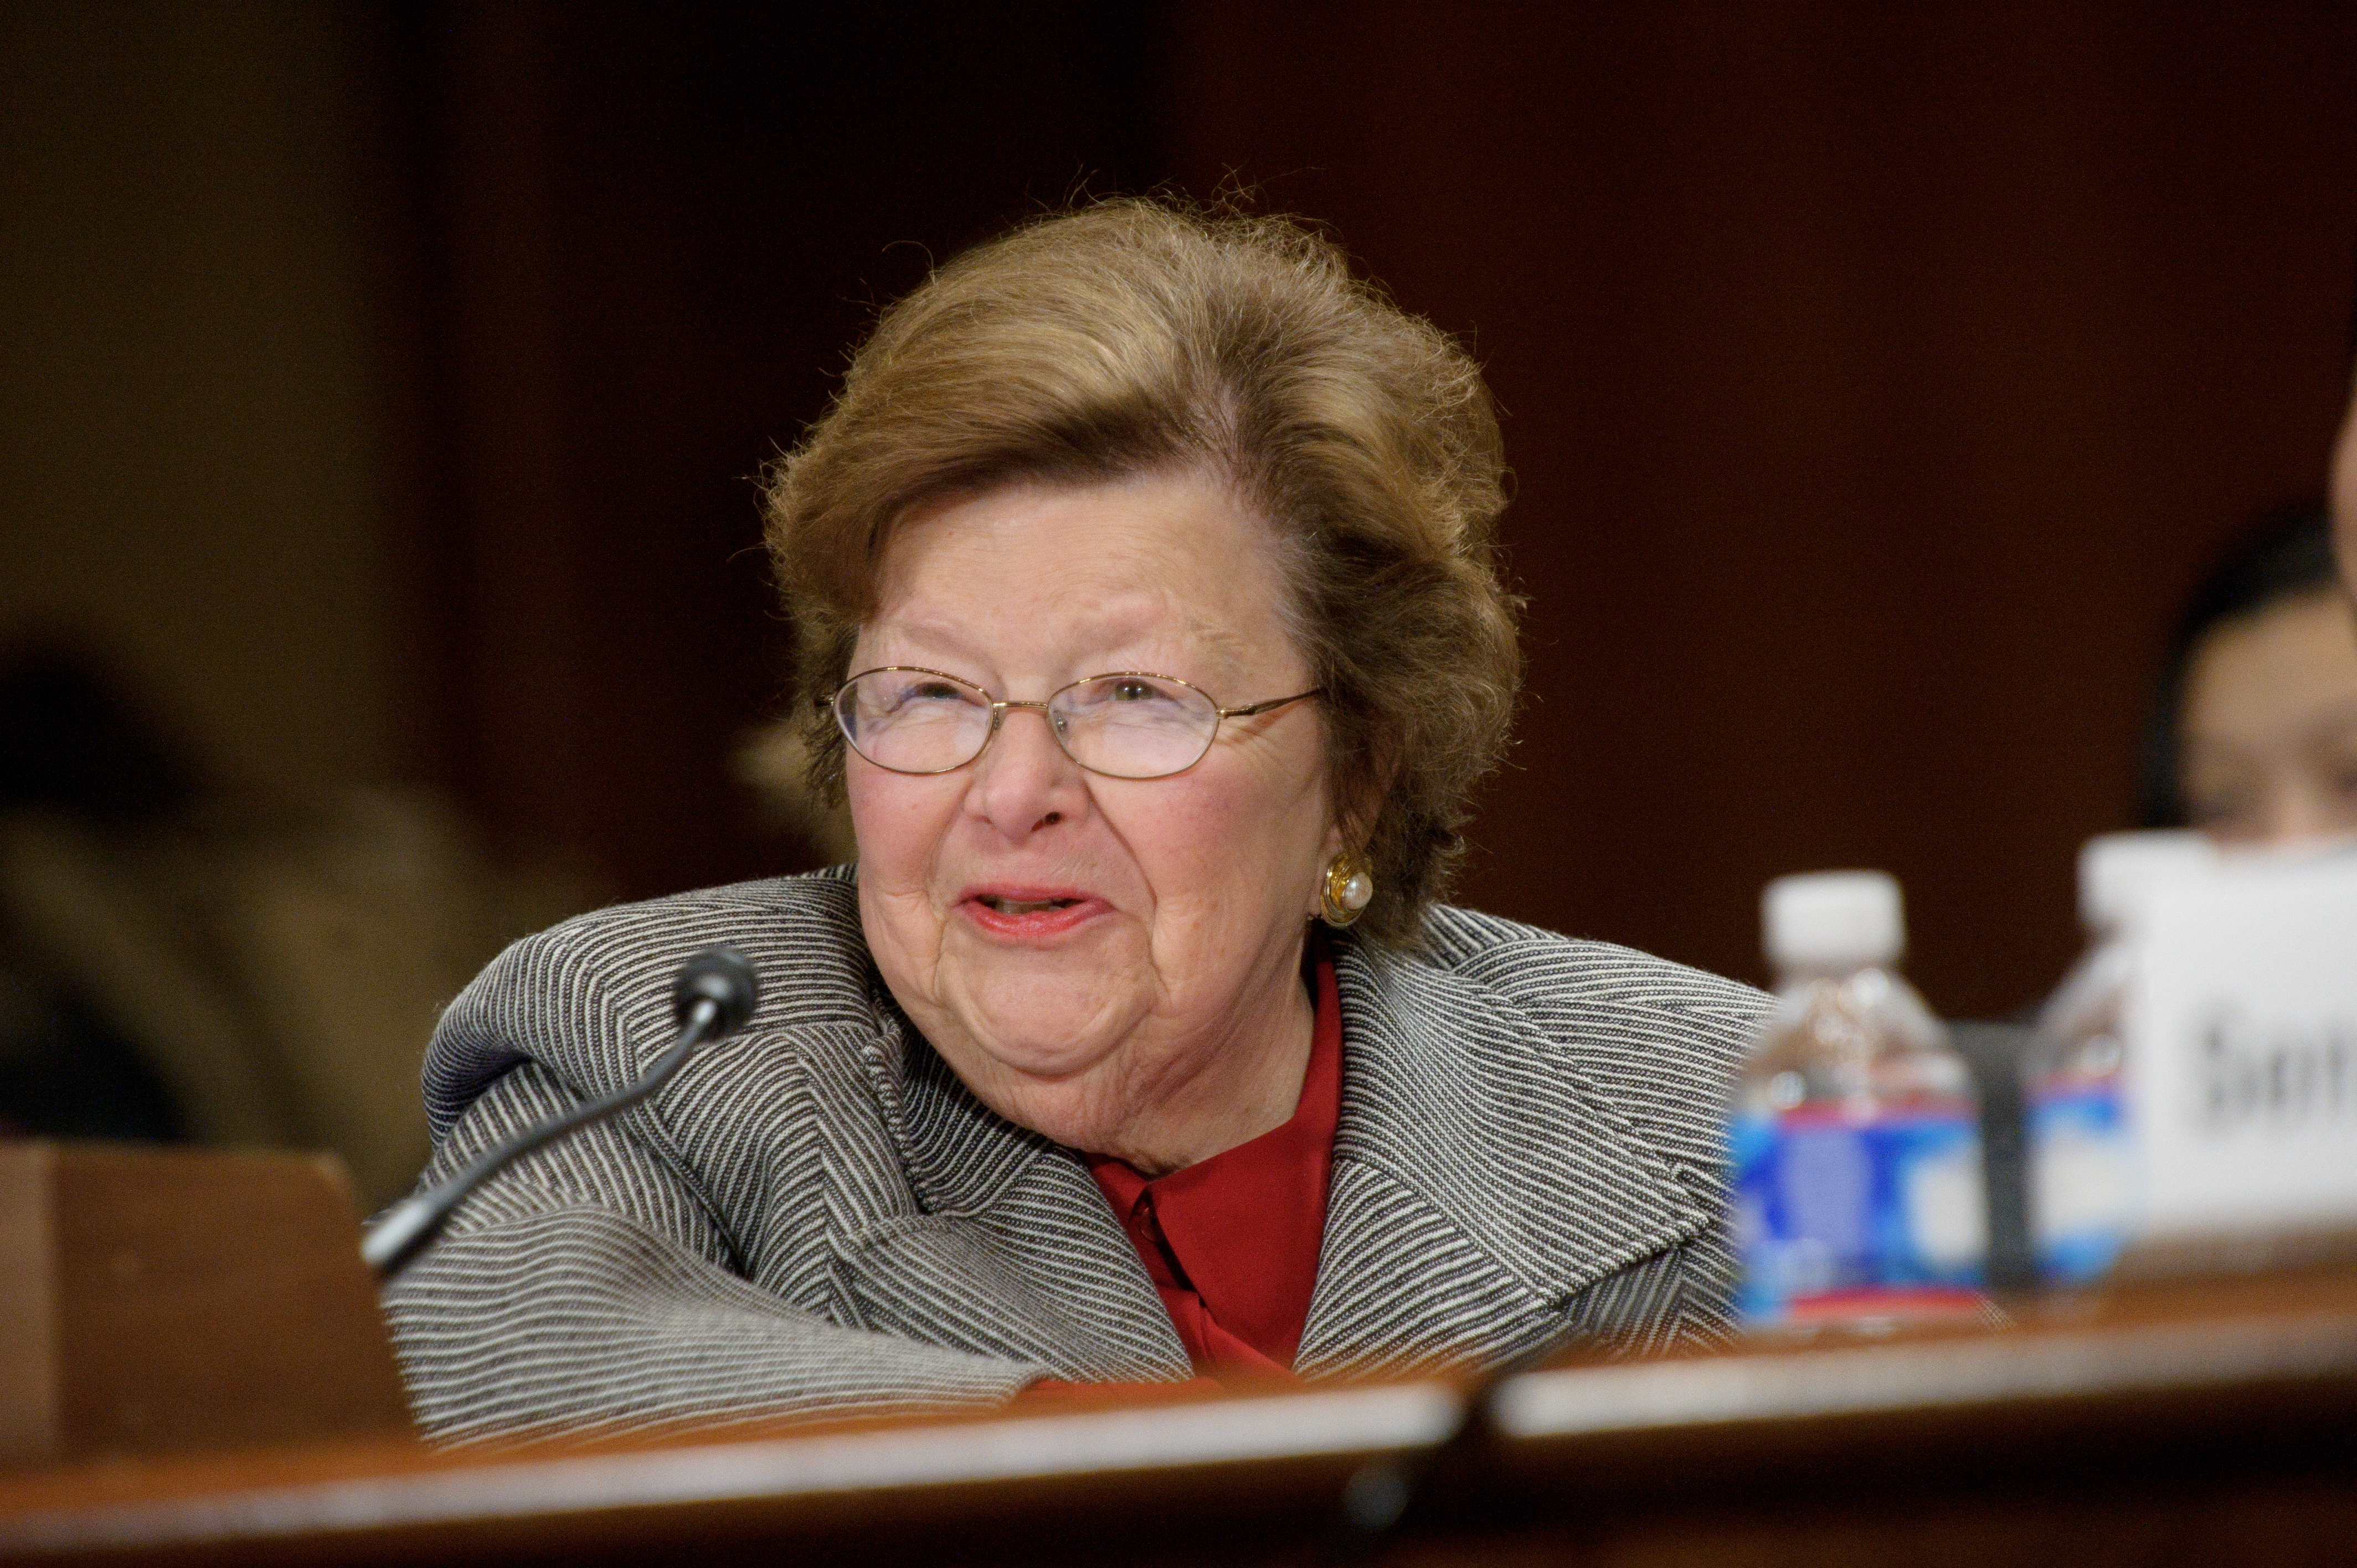 Mikulski Introduces Maryland Disctrict Court Nominee Russell at Senate Confirmation Hearing